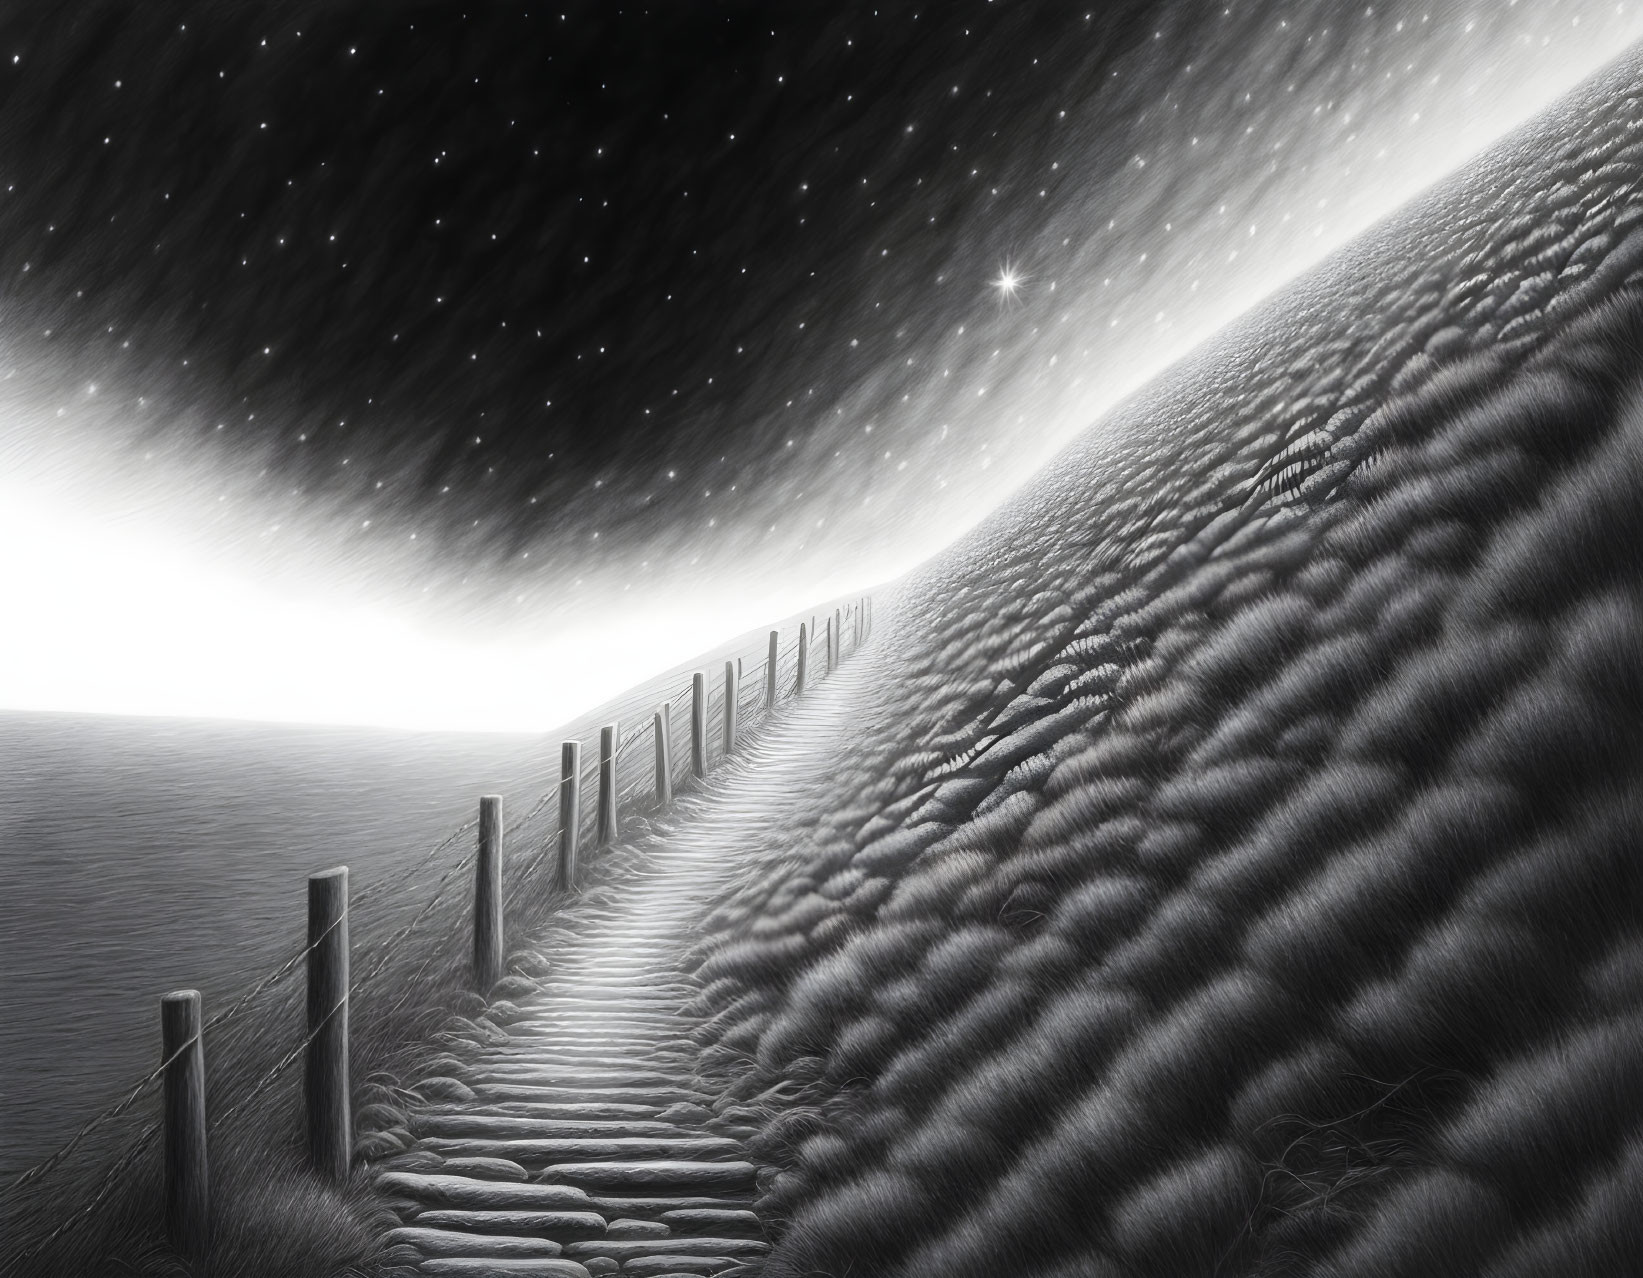 Monochrome illustration of starry sky over sand dune with fence and path